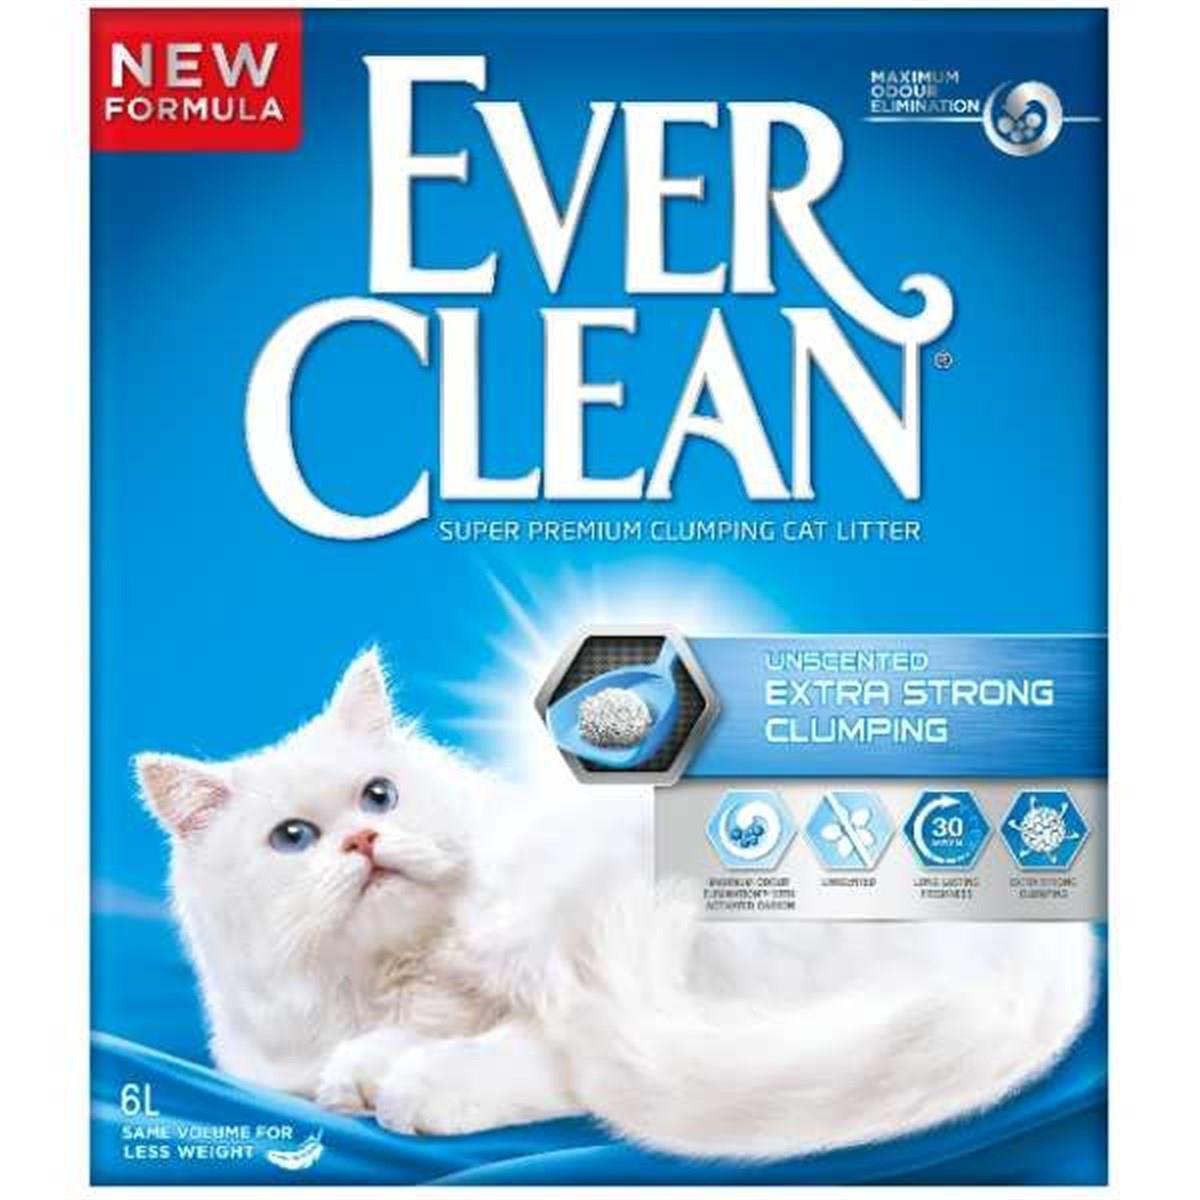 Ever Clean Extra Strong Clumping Unscented Kedi Kumu 10 LT